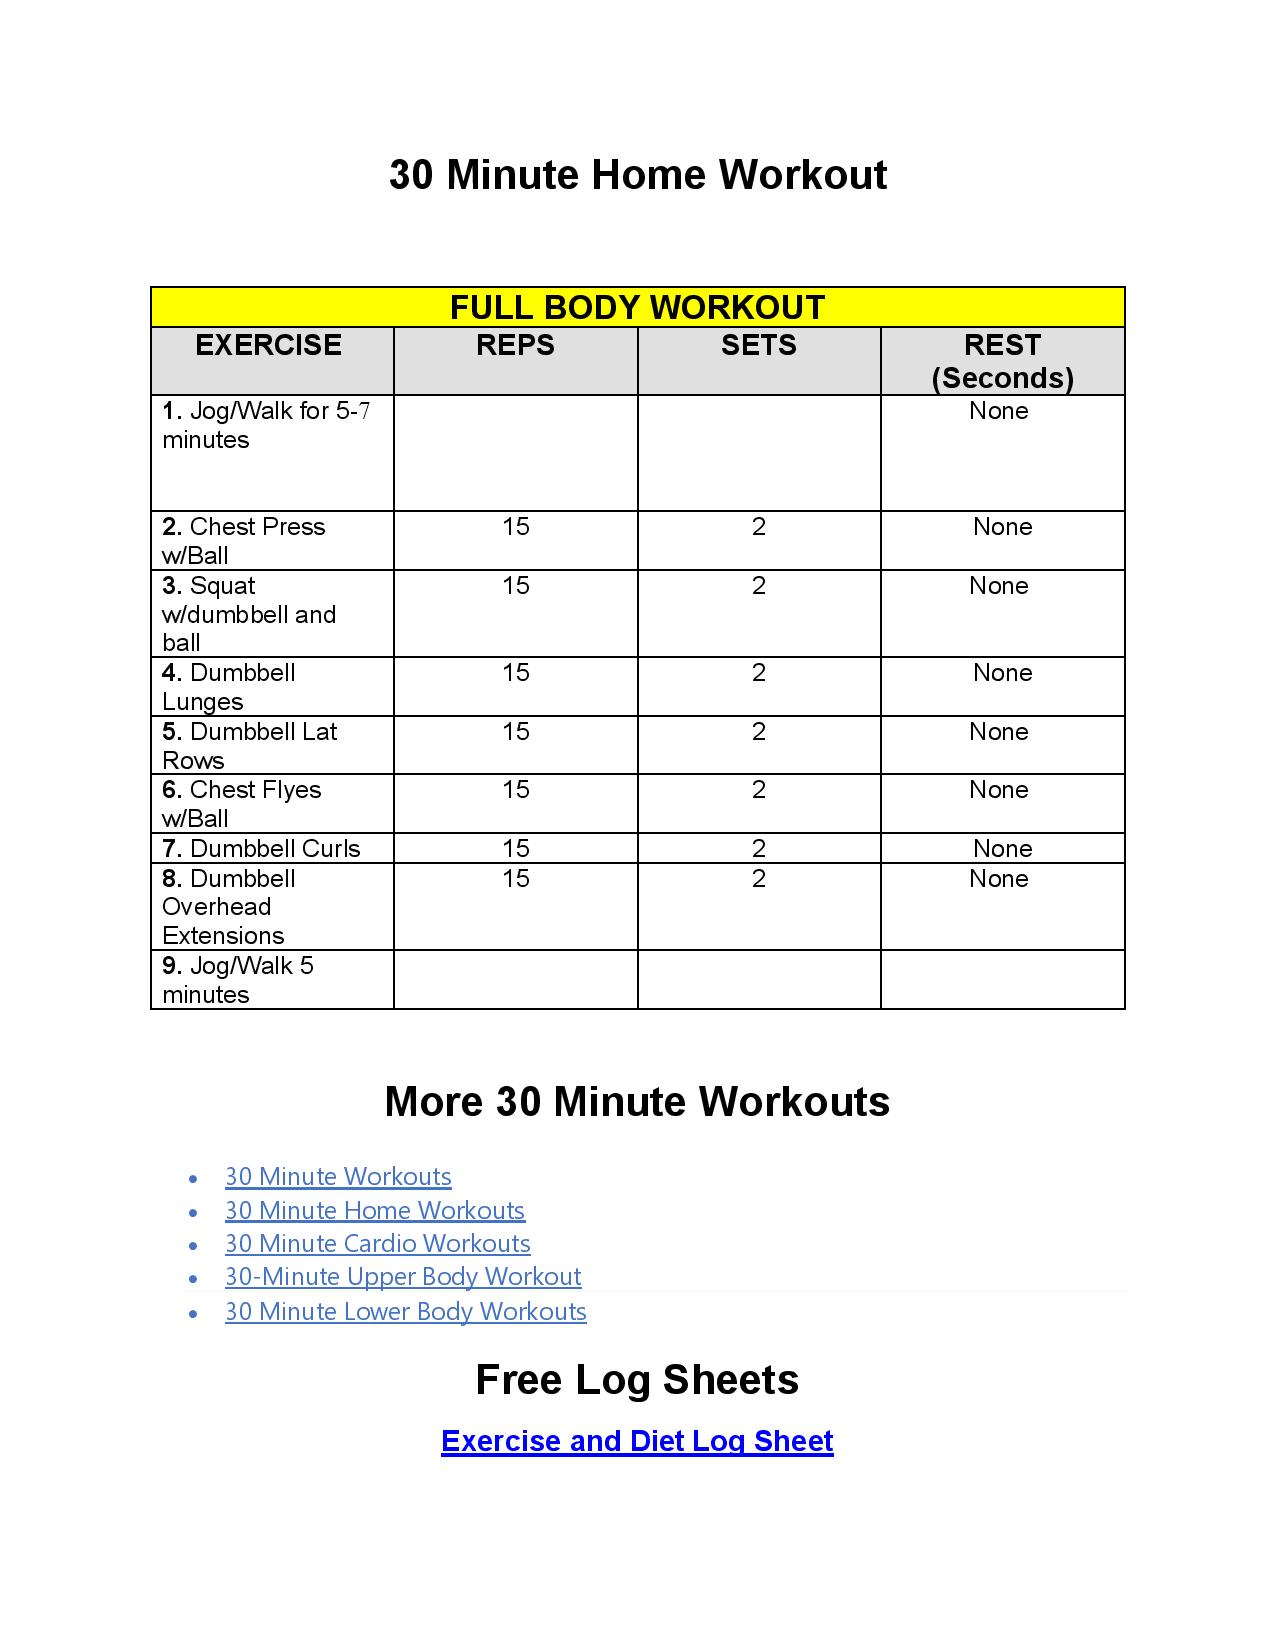 30 minute home sample workout pdf.